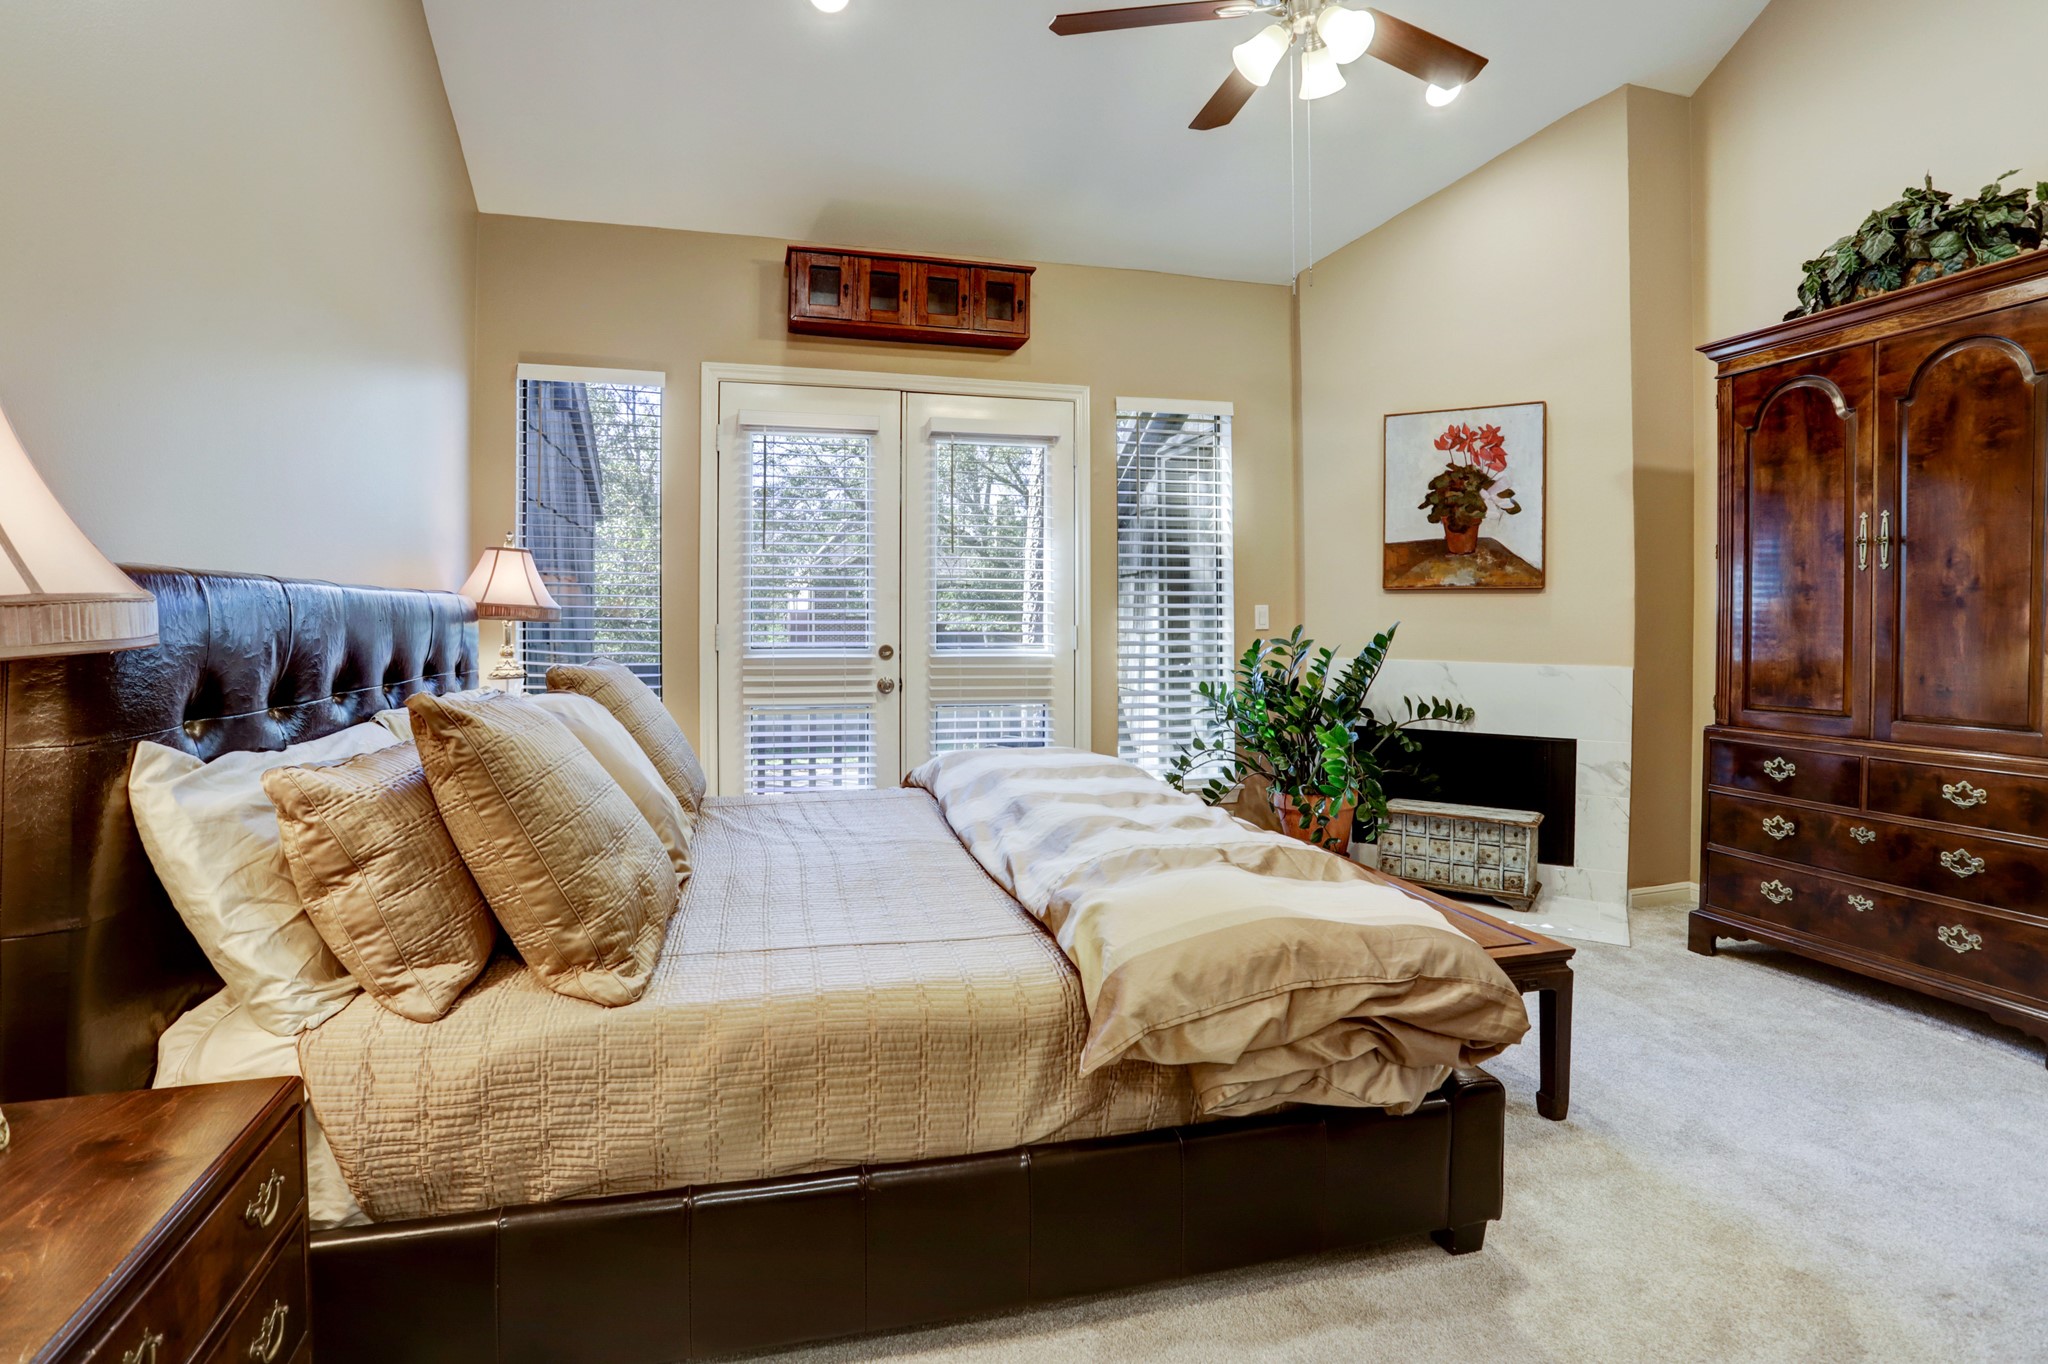 Primary bedroom w/ vaulted ceilings, fireplace and private balcony